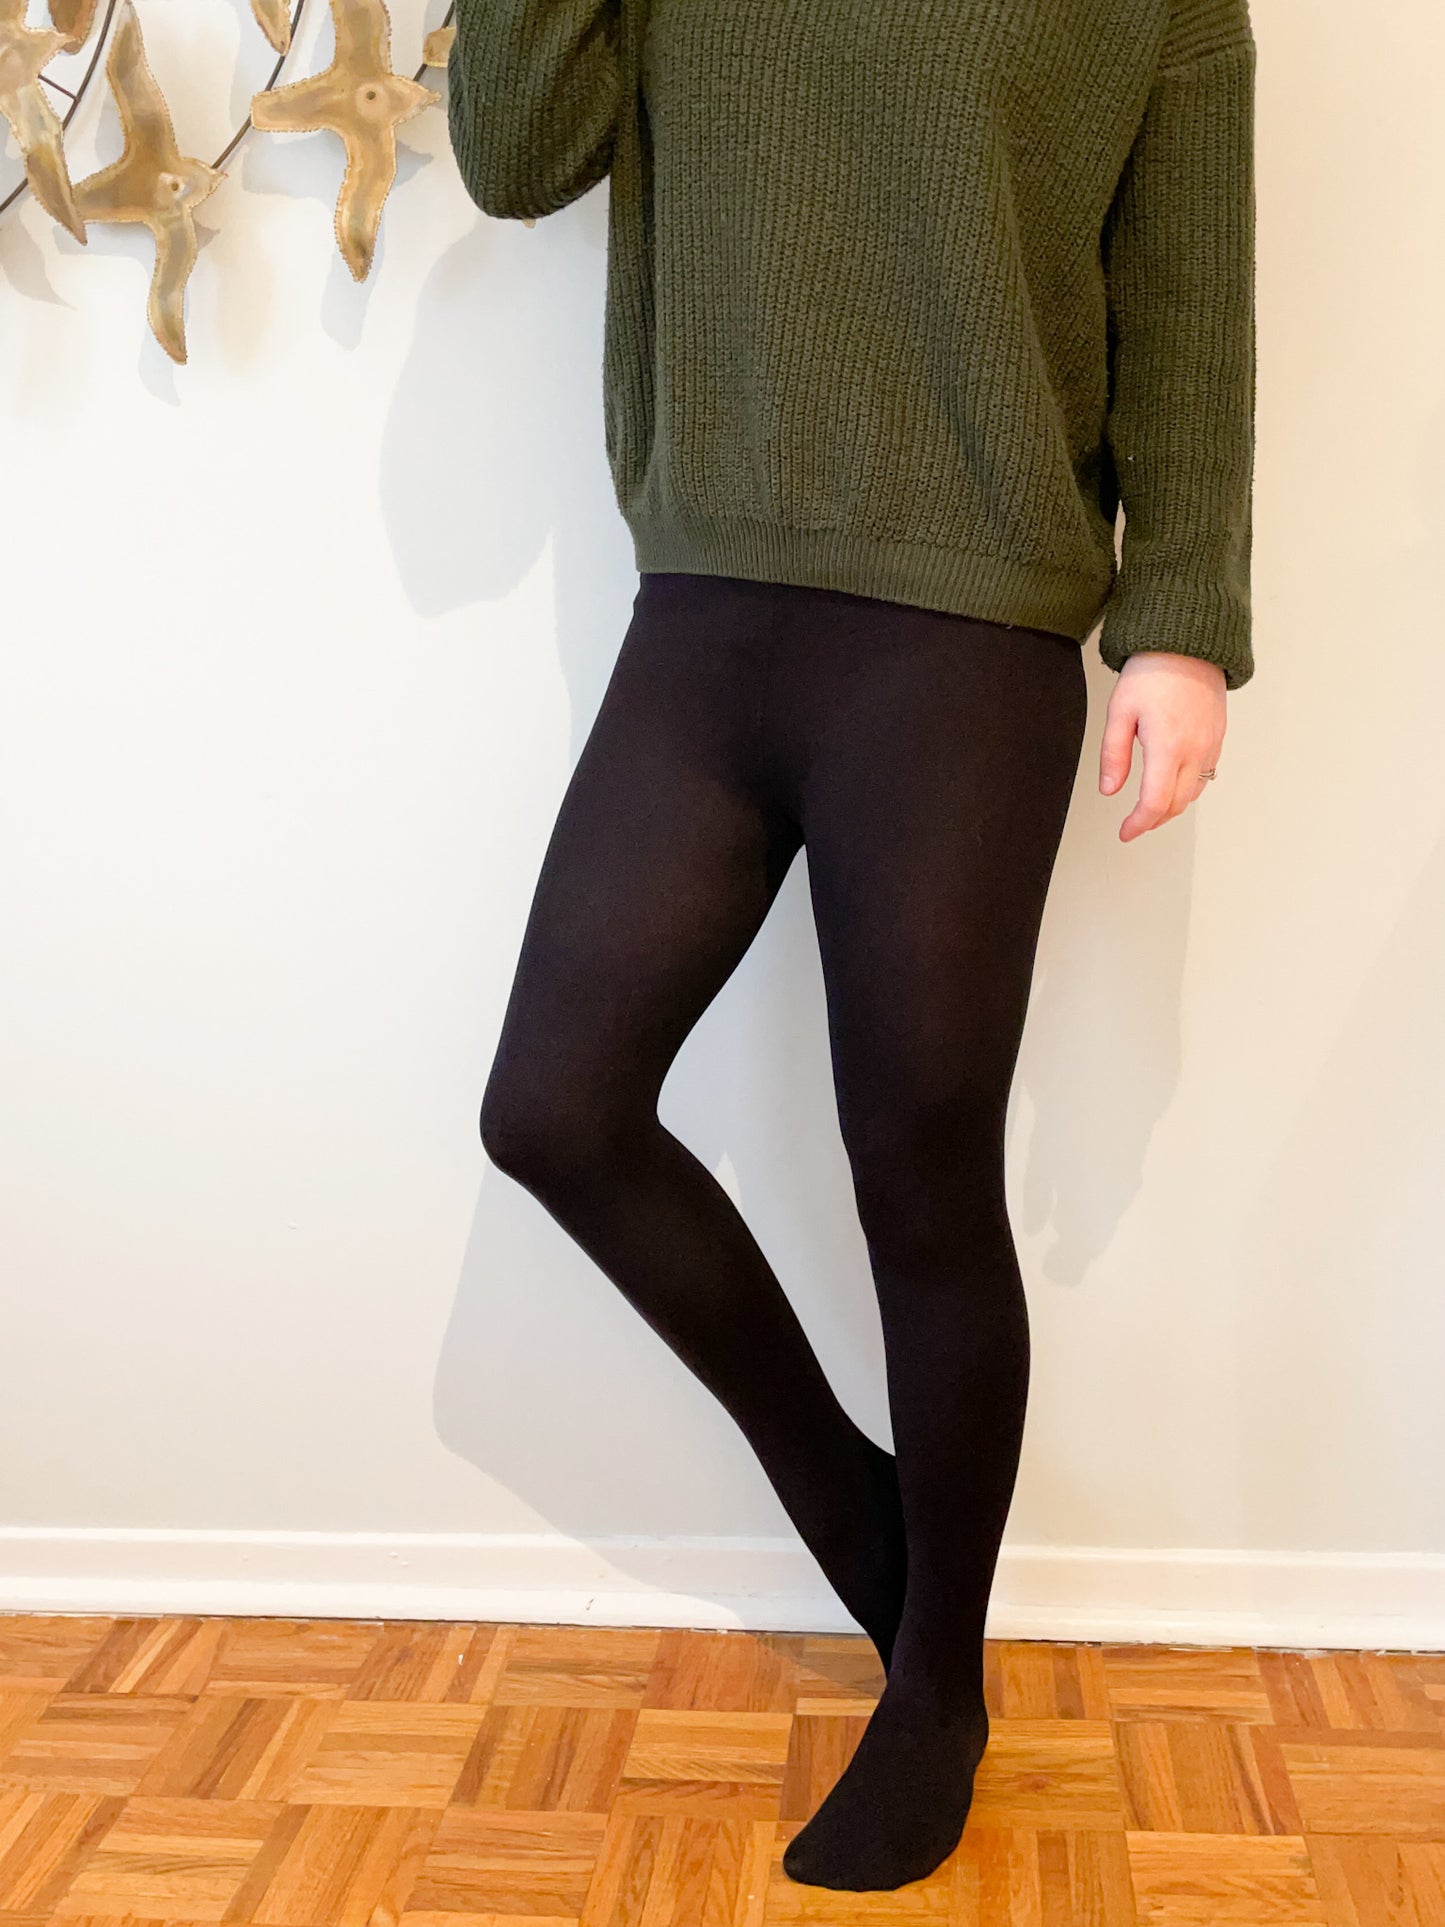 Black Footed Fleece Lined Tights - XS / Small Petite